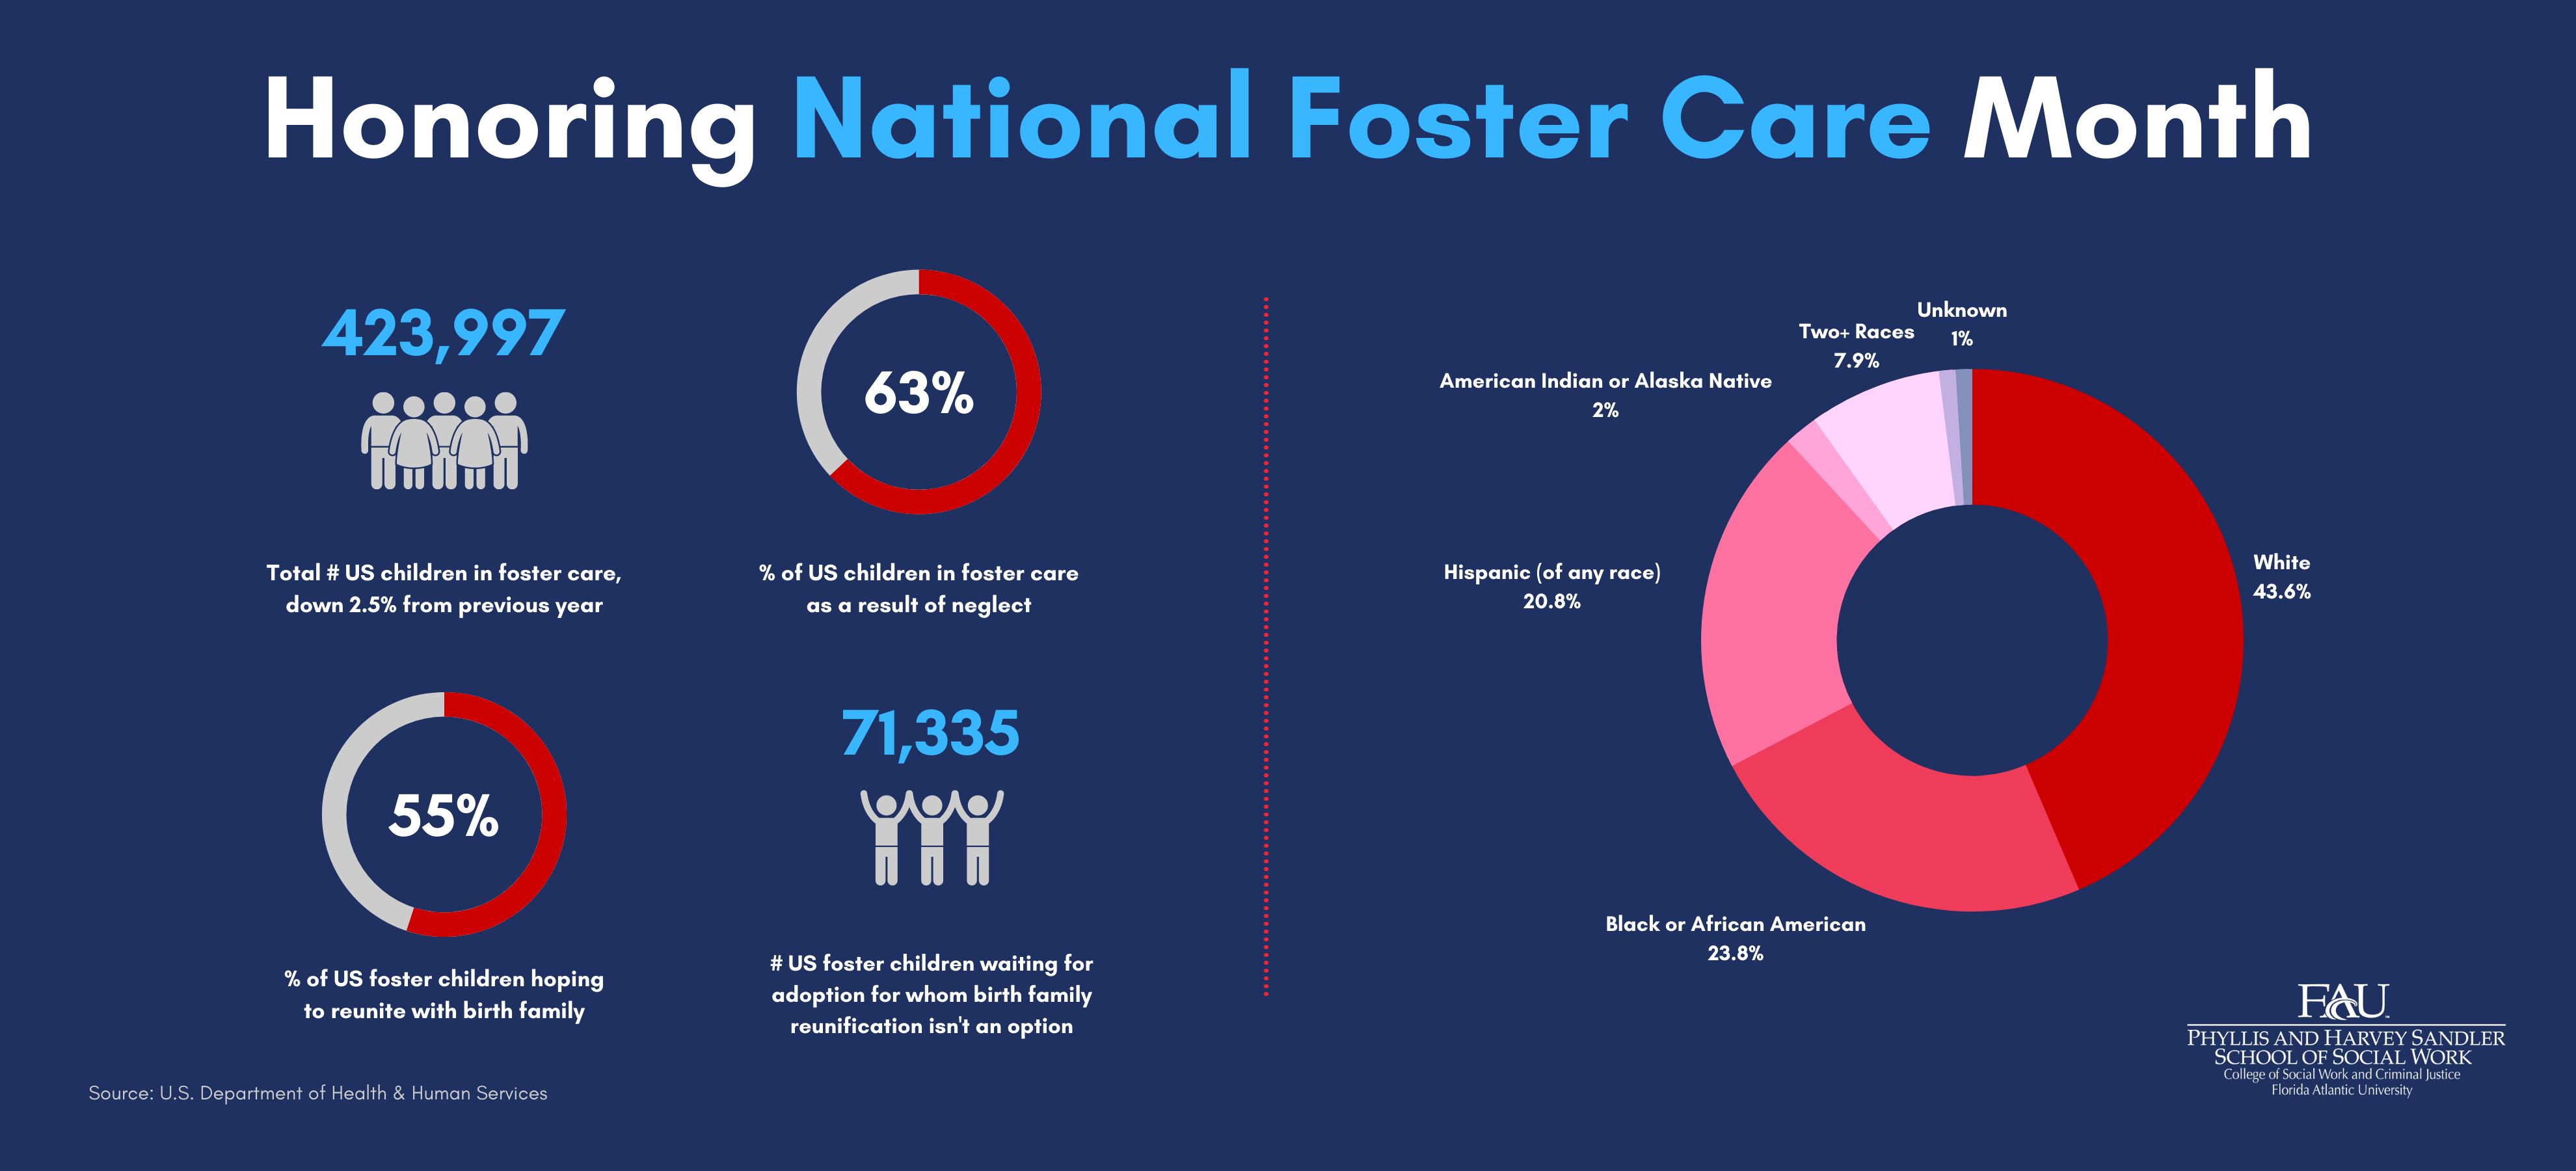 Honoring National Foster Care Month